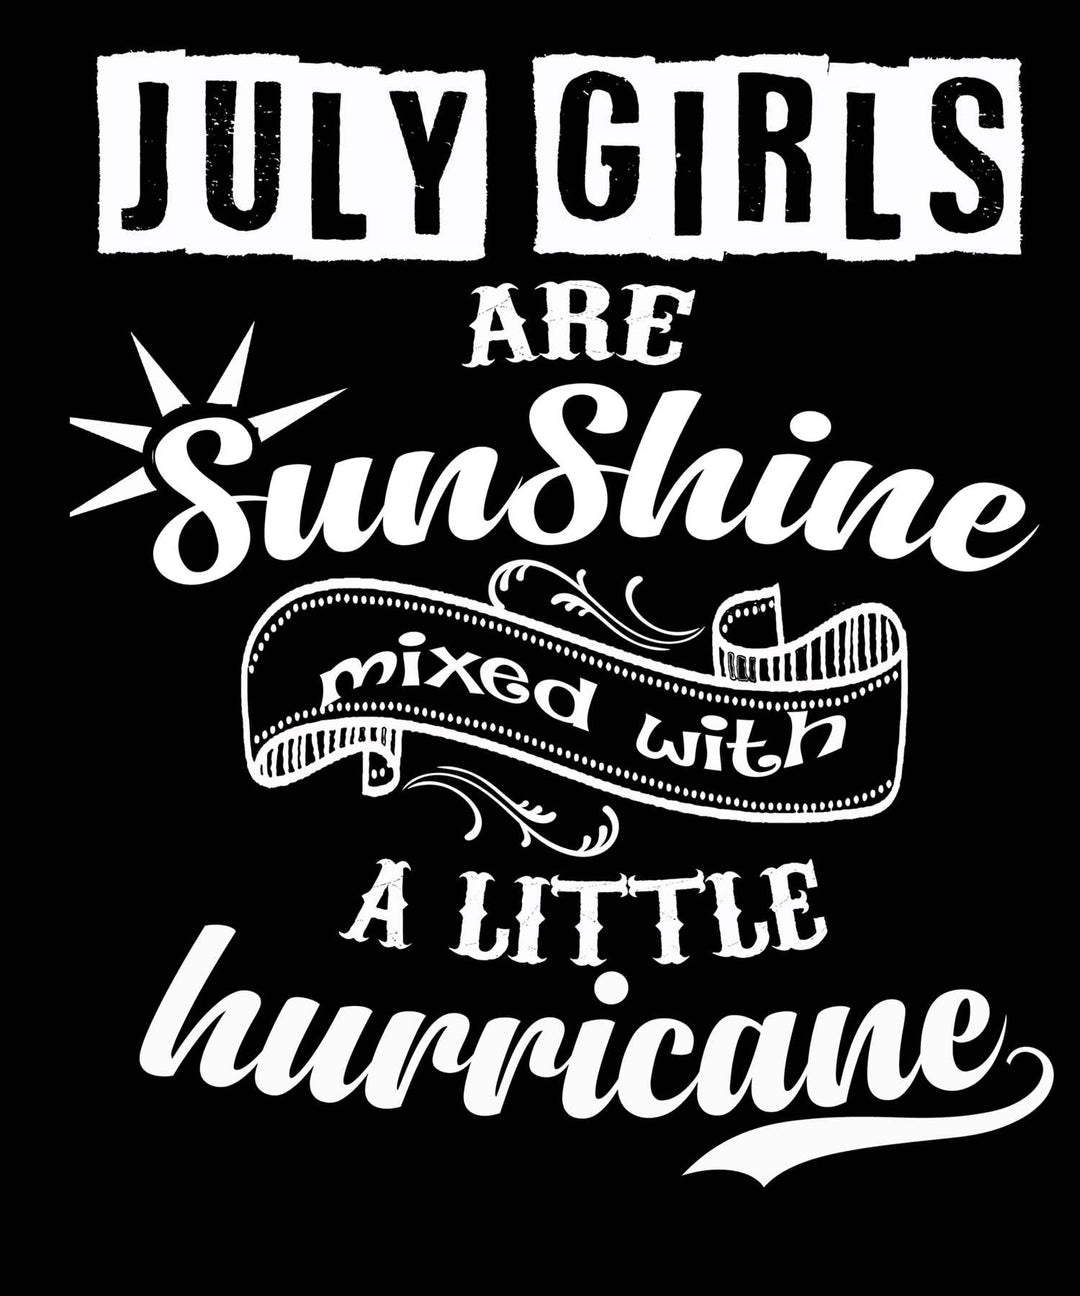 JULY GIRLS ARE SUNSHINE MIXED WITH LITTLE HURRICANE, BIRTHDAY BASH -Buy All Colors. Enjoy.